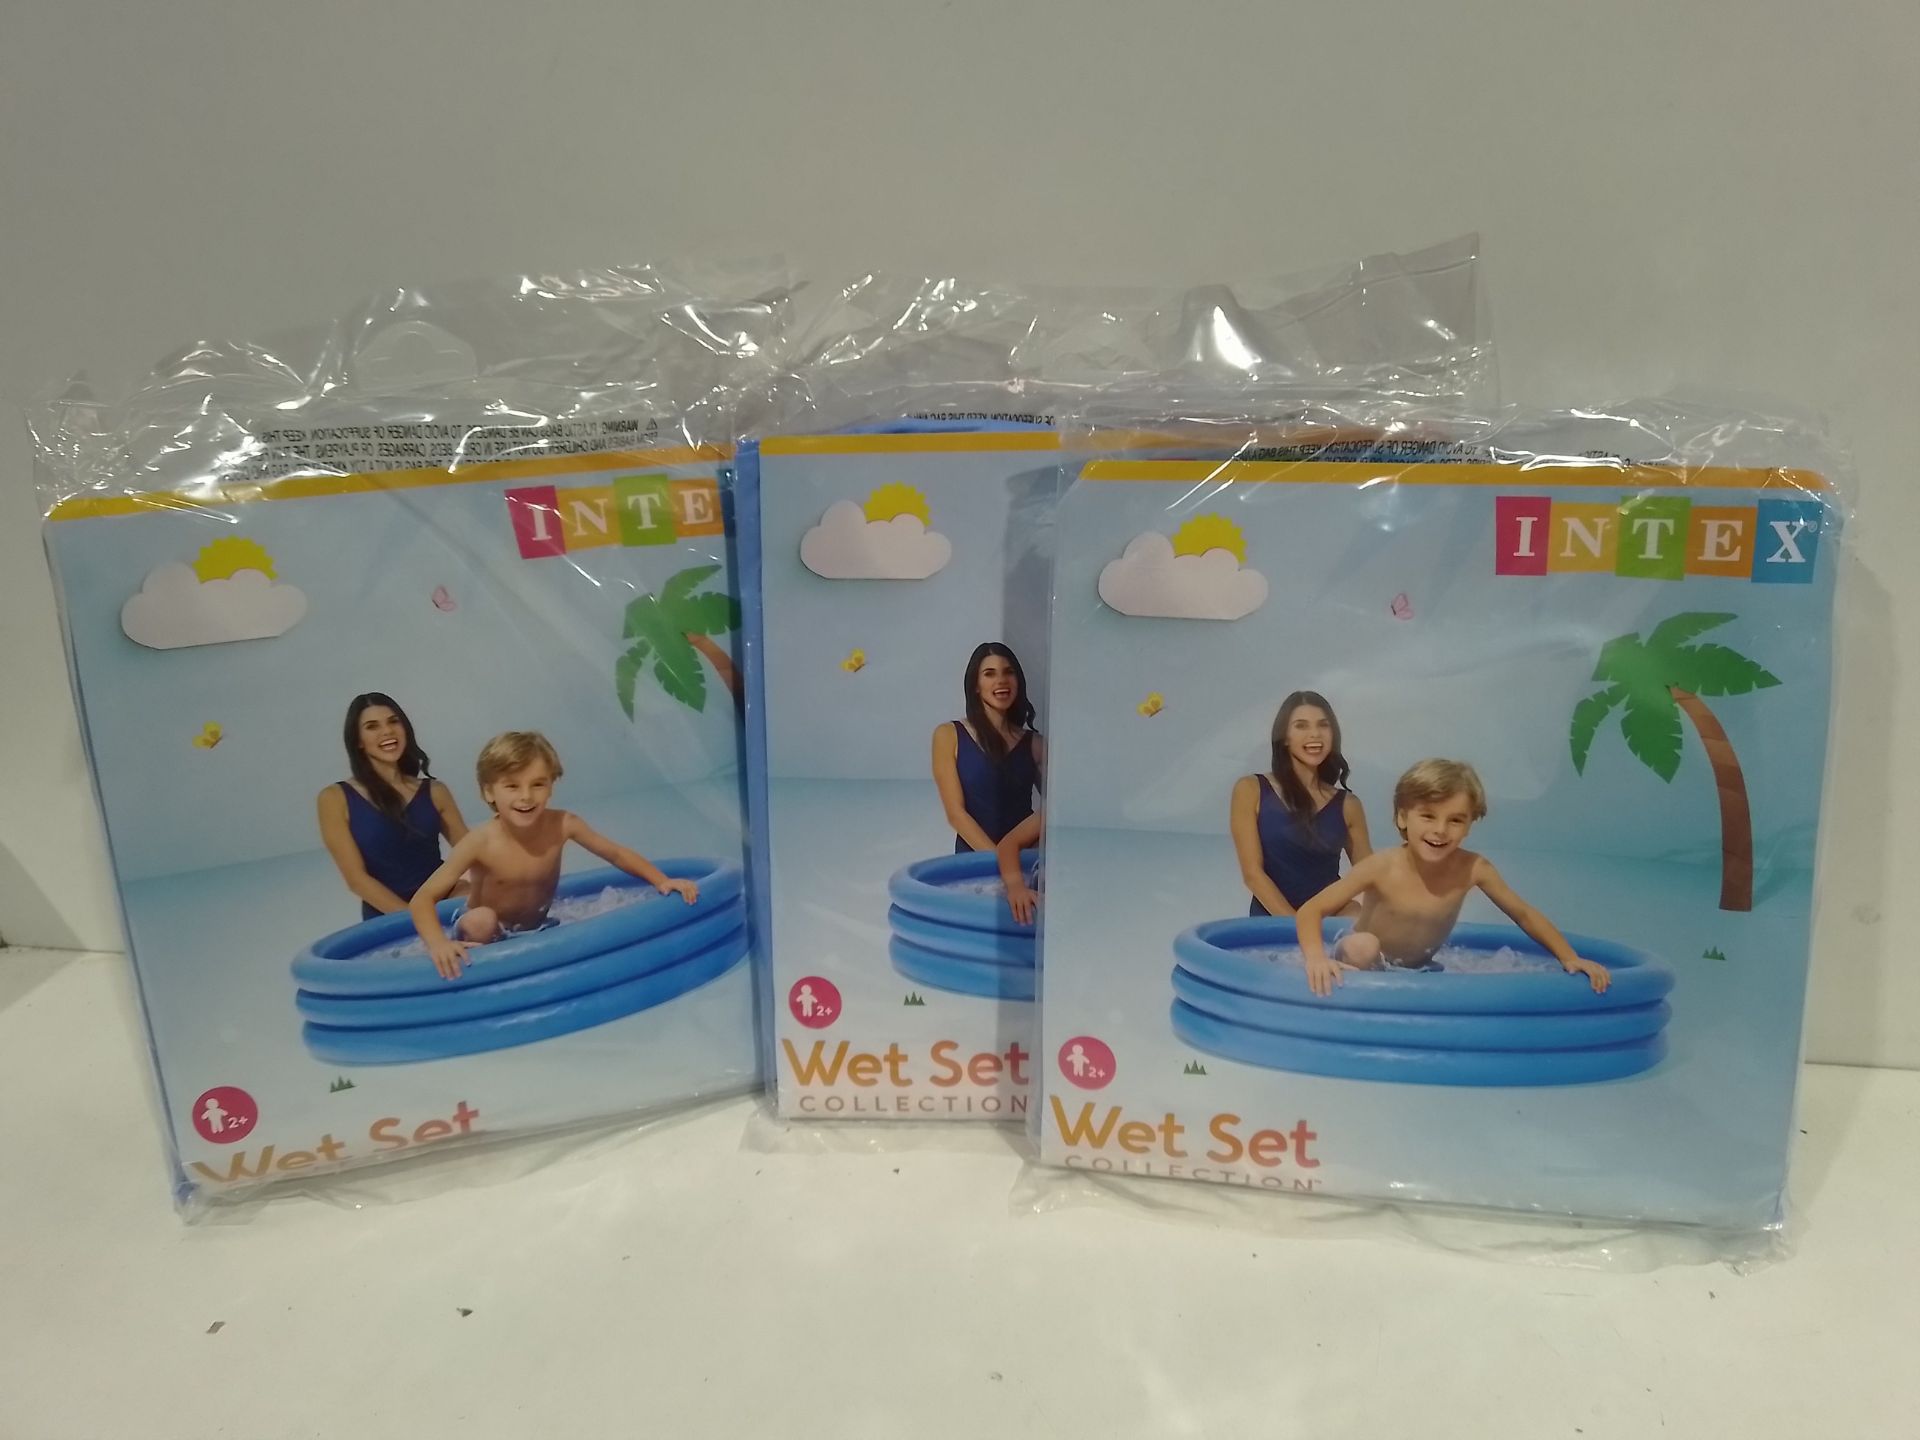 RRP £21.18 Total, Lot consisting of 3 items - See description. - Image 2 of 2